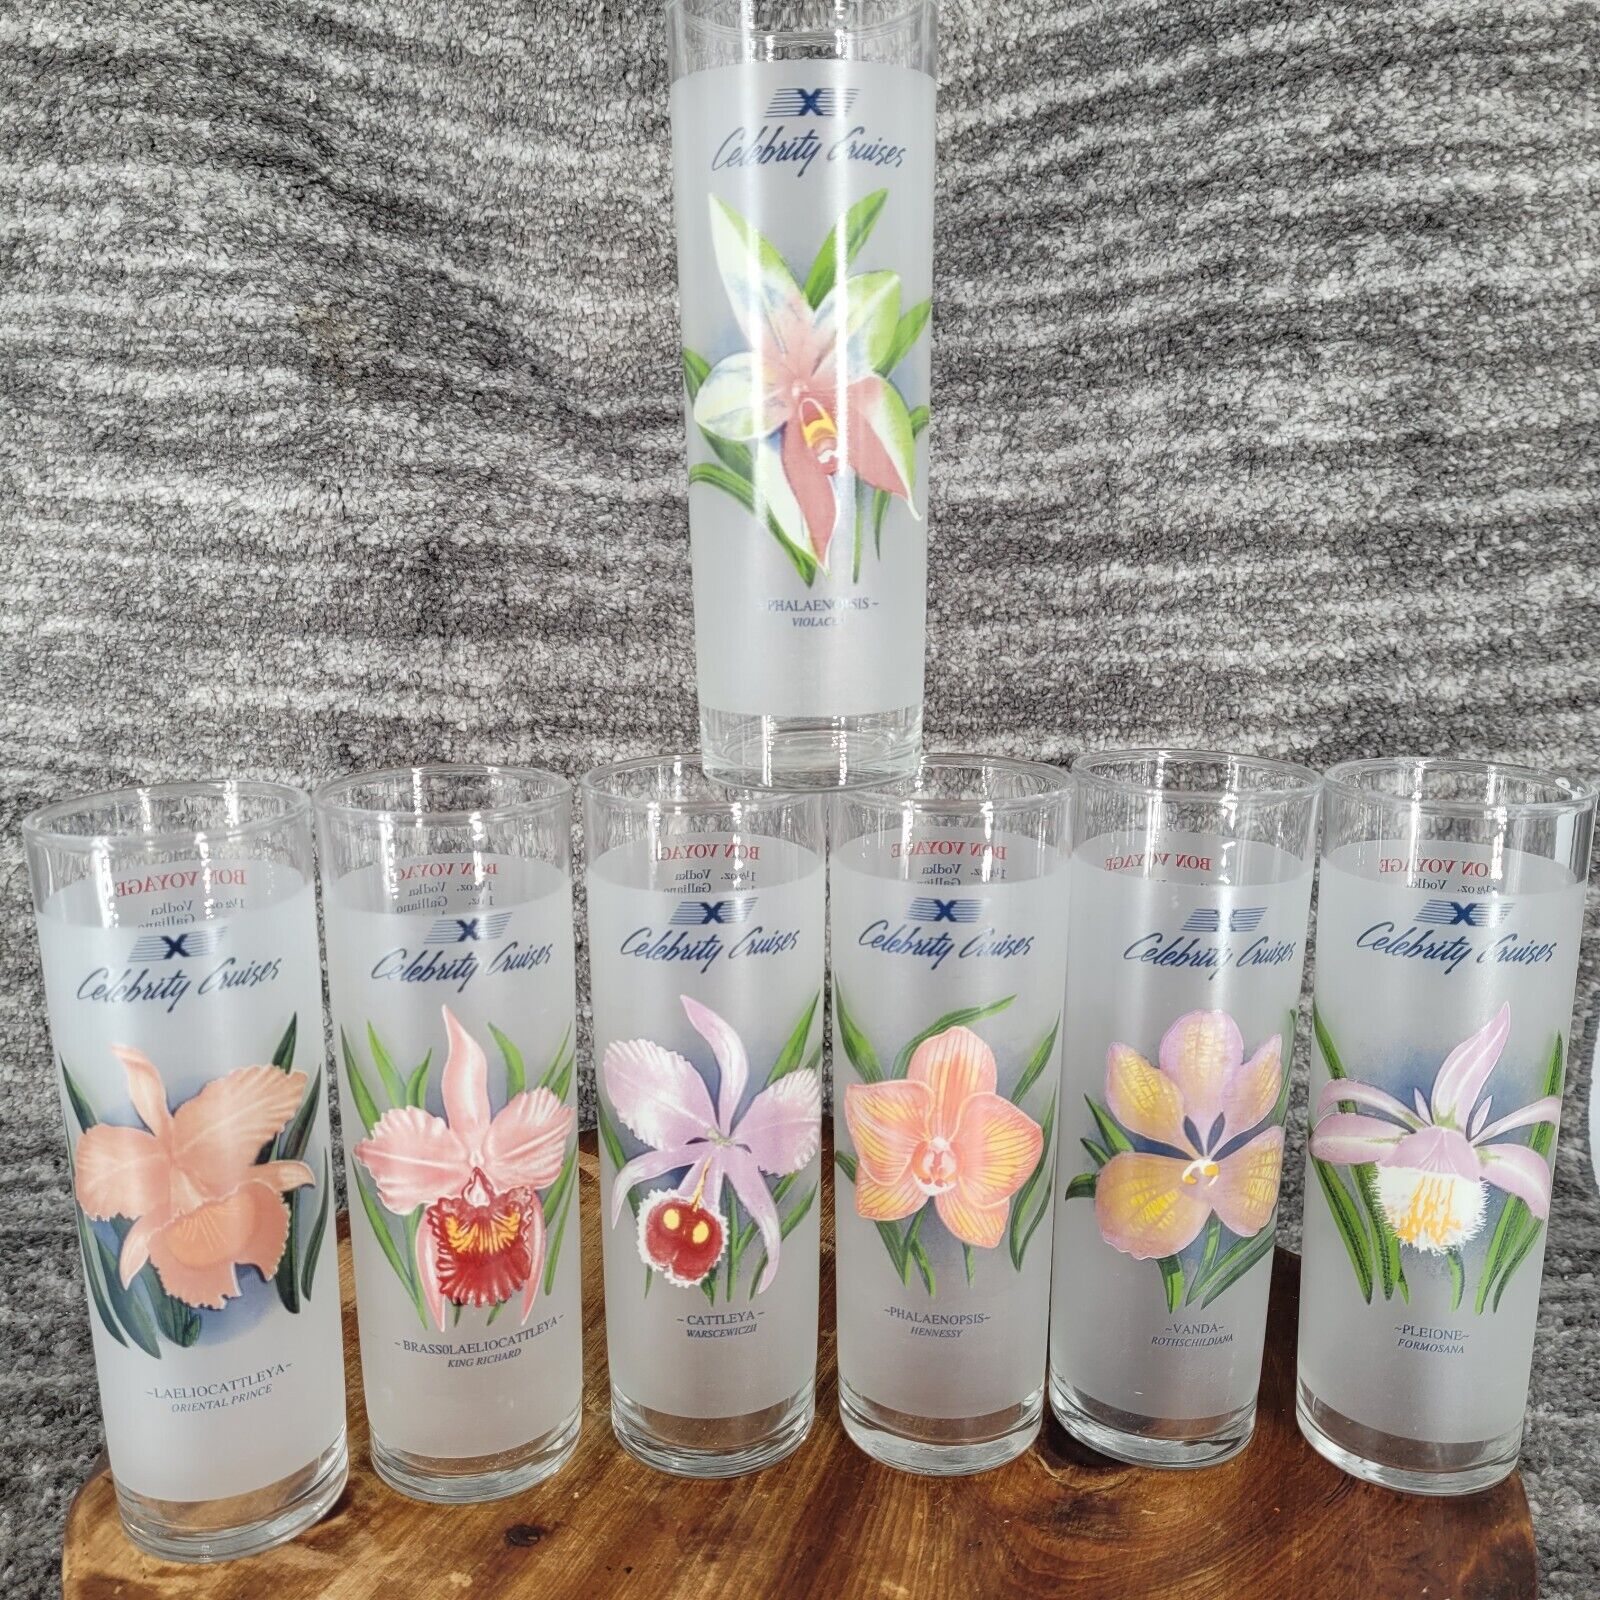 Celebrity Cruises Lot of 7 Floral Frosted Cocktail Recipe Tumbler Collins Glass